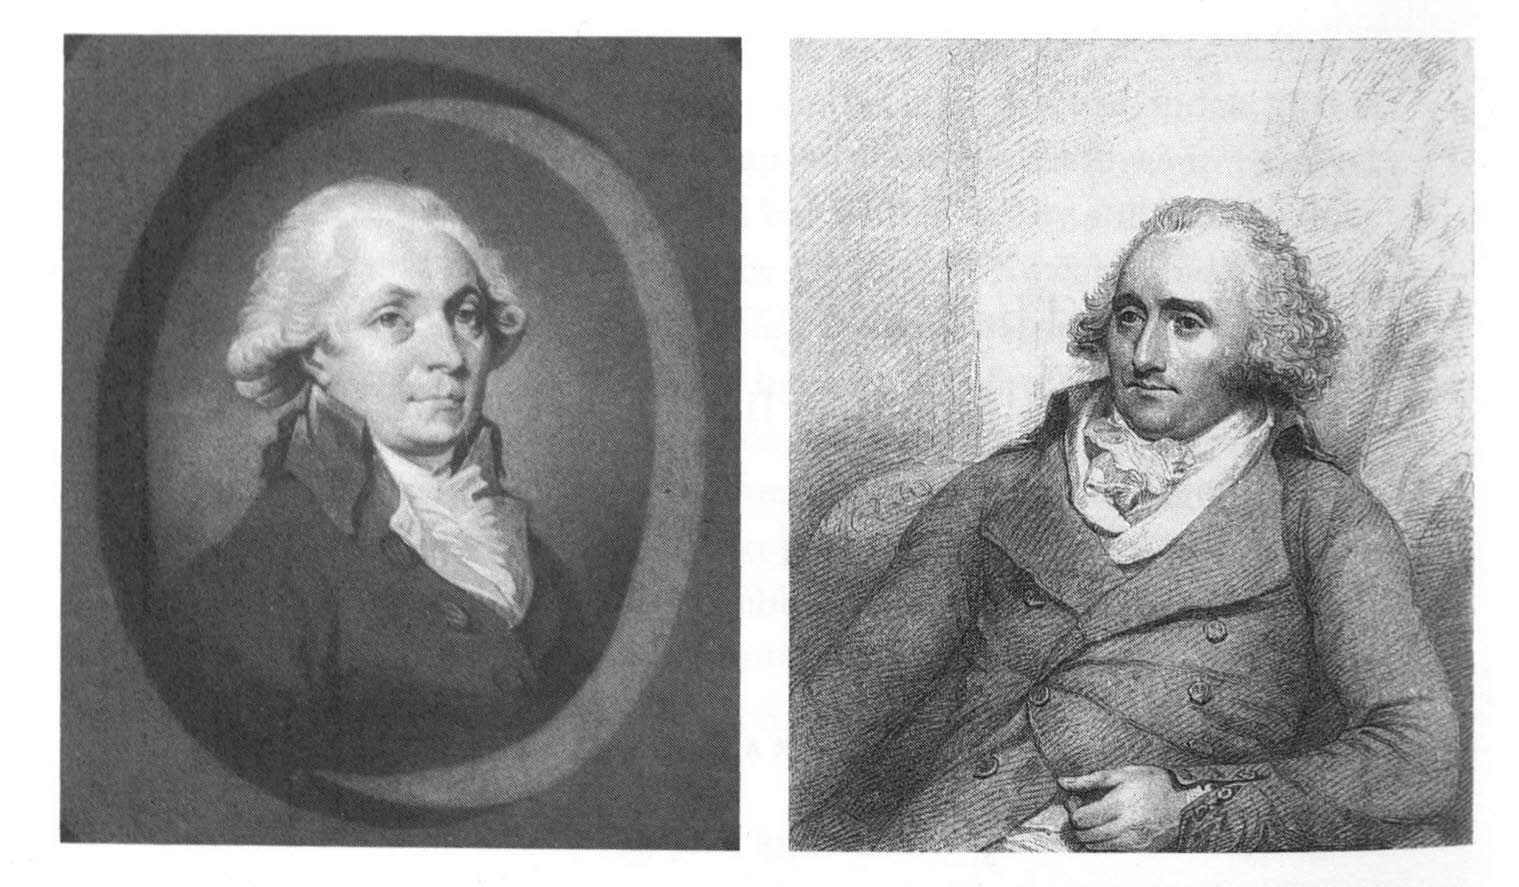 The printer William Strahan (left) and bookseller Thomas Cadell (right), whose publishing partnership dominated the London scene from the late 1760s to 1785. British Library Add. MS 38730, fol. 180v, and Providence Public Library, both reproduced in Sher, The Enlightenment & the book, p. 328.